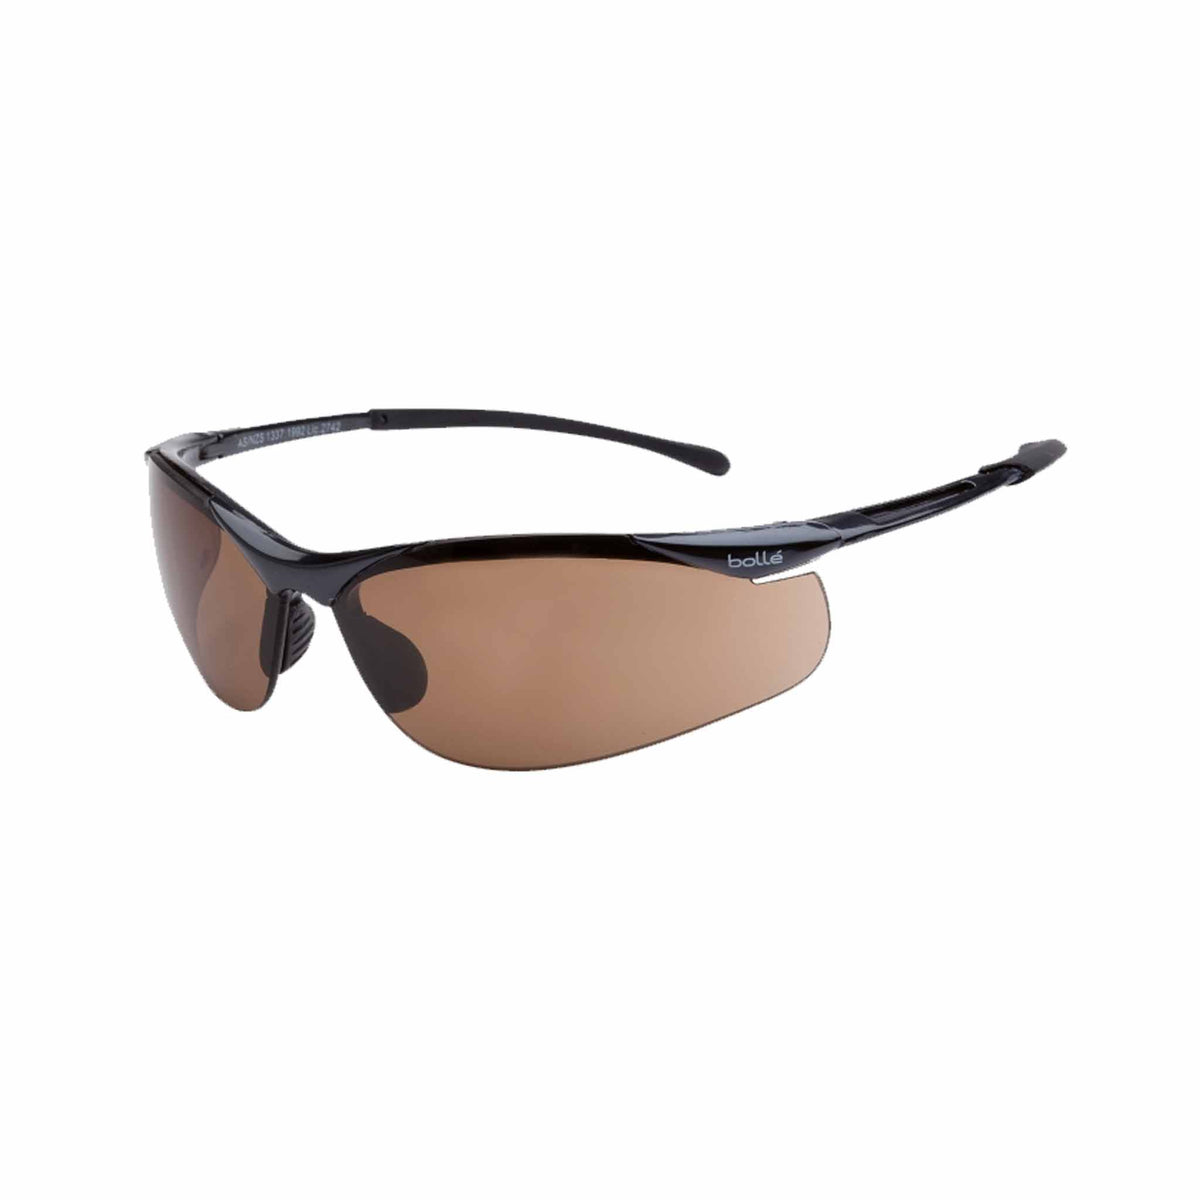 bolle contour sidewinder glasses with bronze lenses